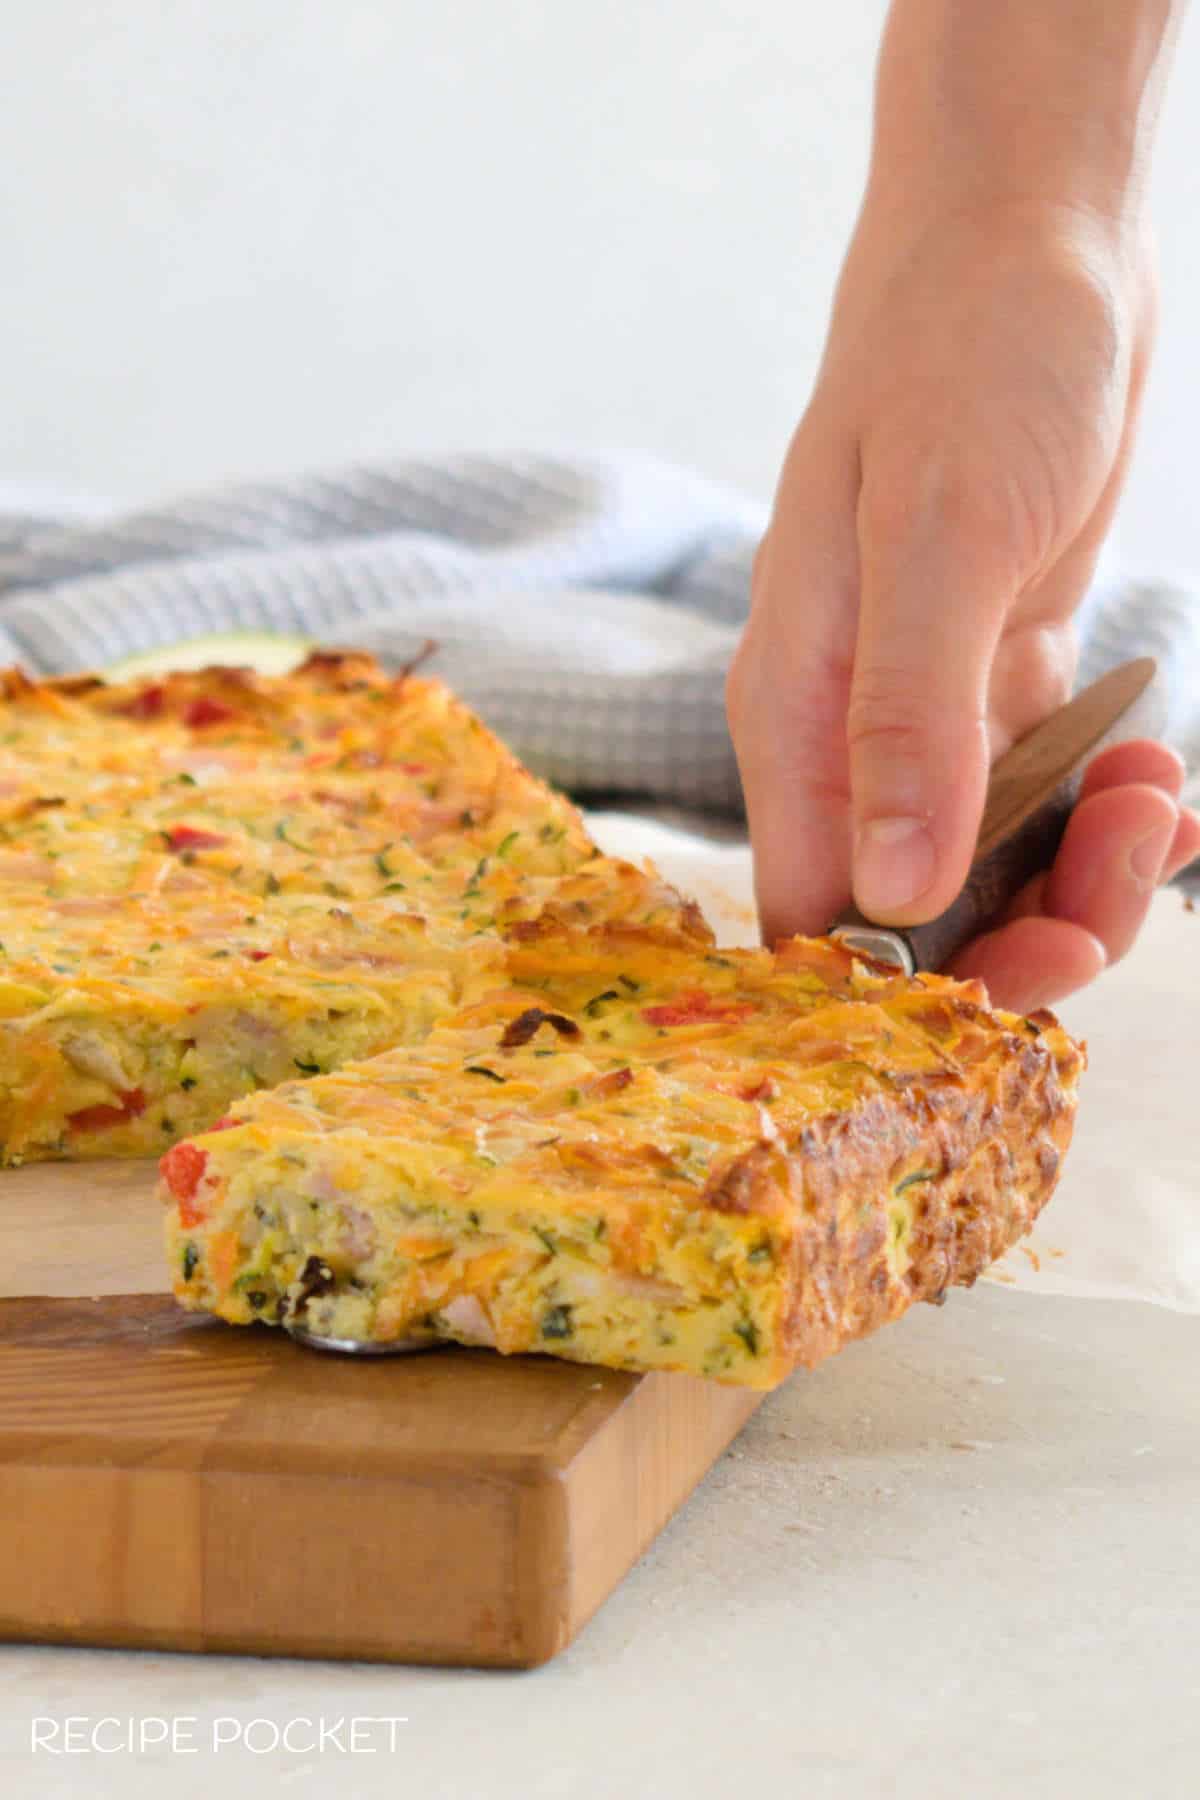 A close up of zucchini and carrot slice on a cake server being held by a hand.